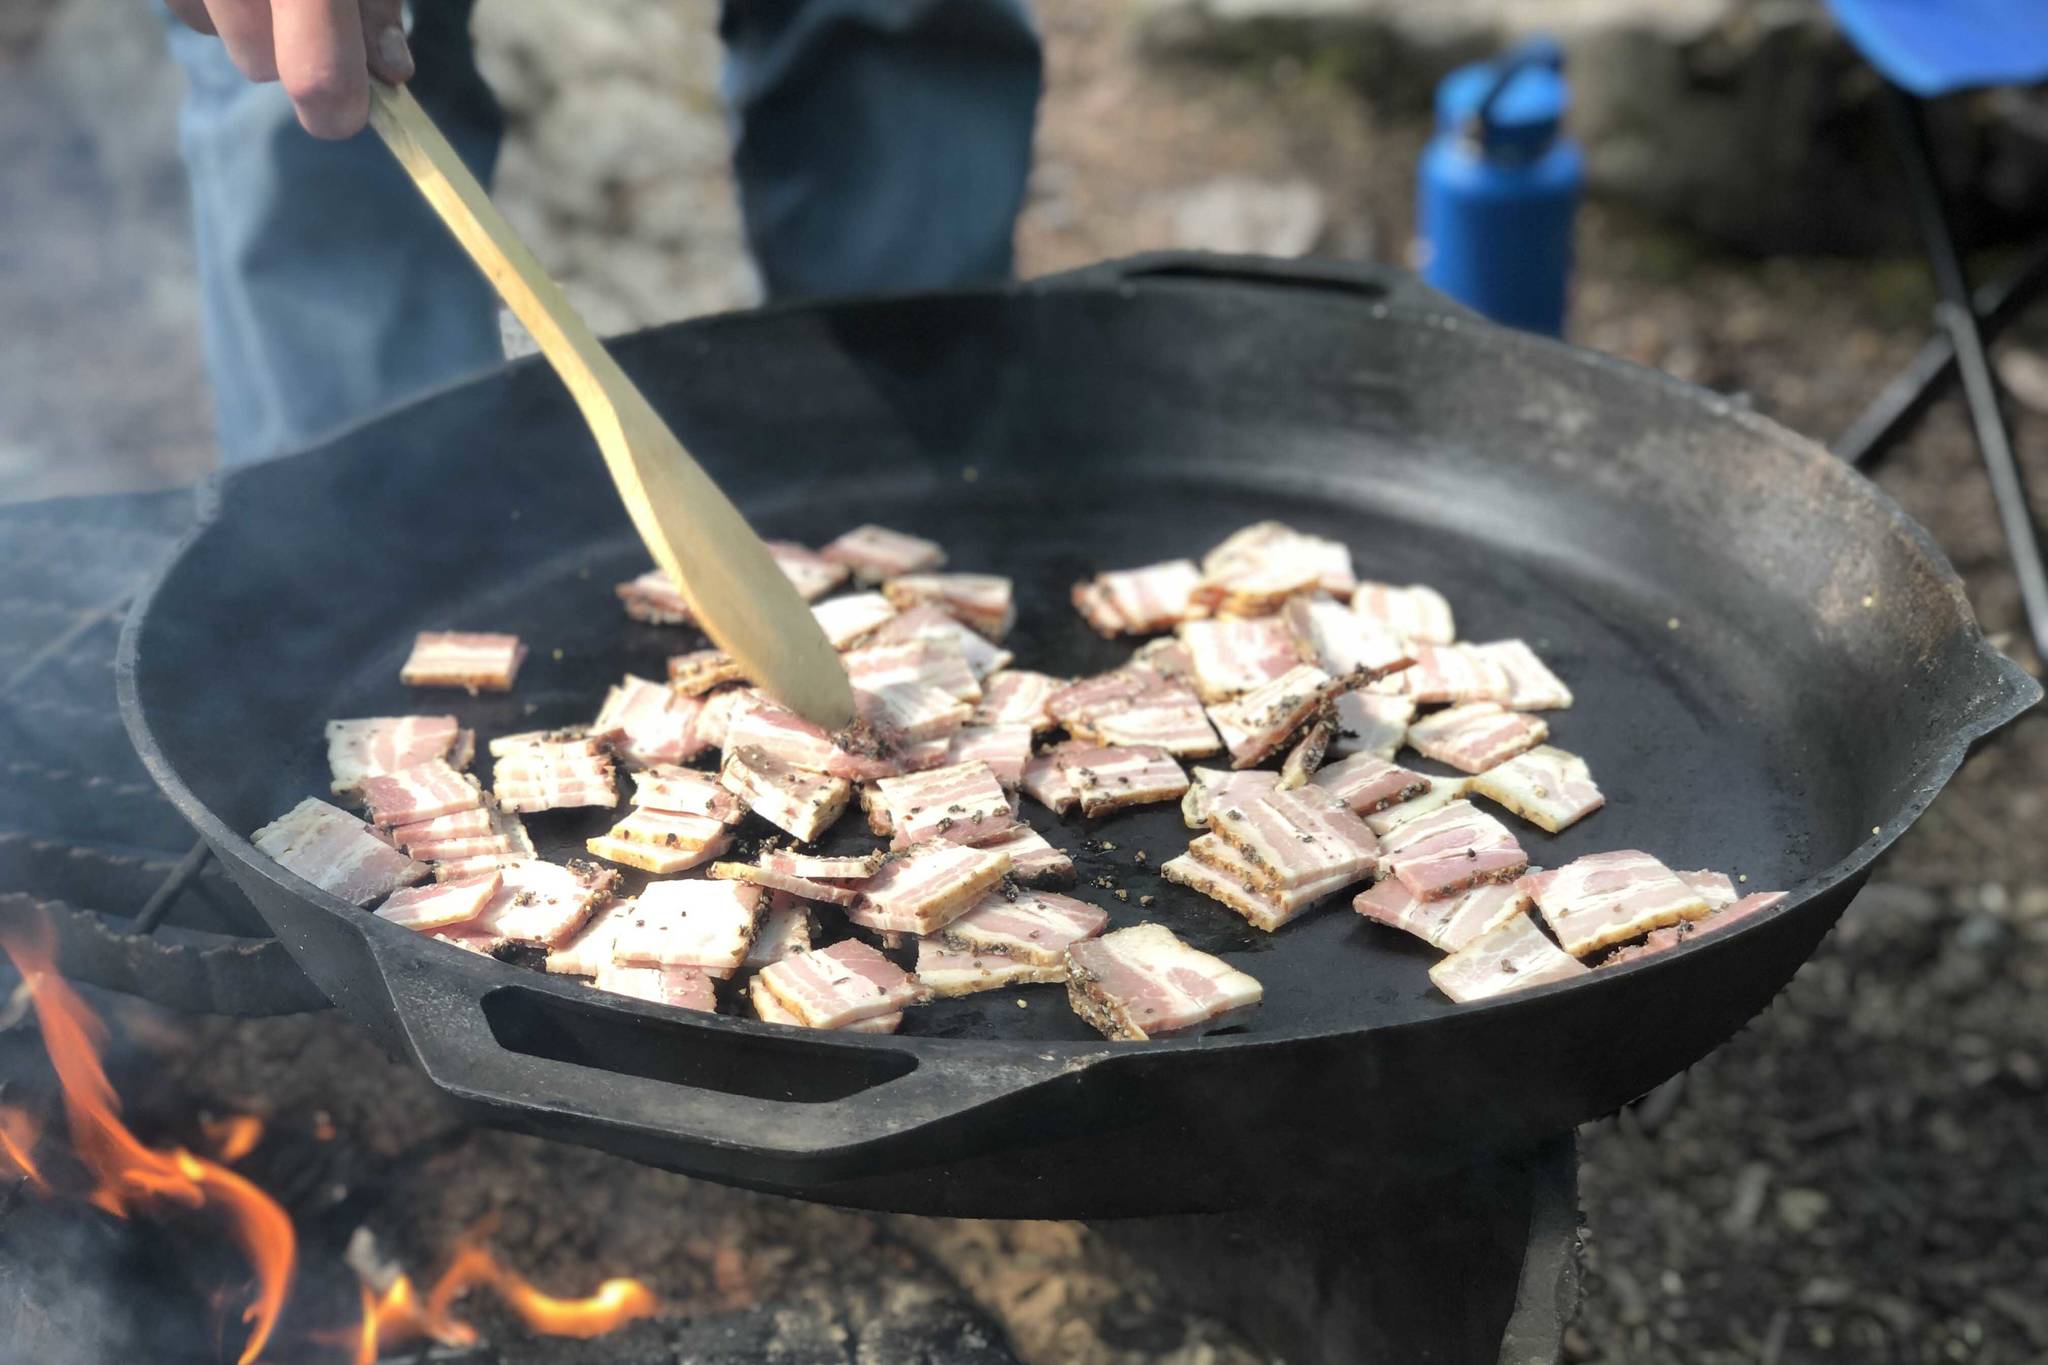 Bacon is prepared on a fire pit, June 19, 2020, in the Copper River Valley, Alaska. (Photo by Victoria Petersen/Peninsula Clarion)